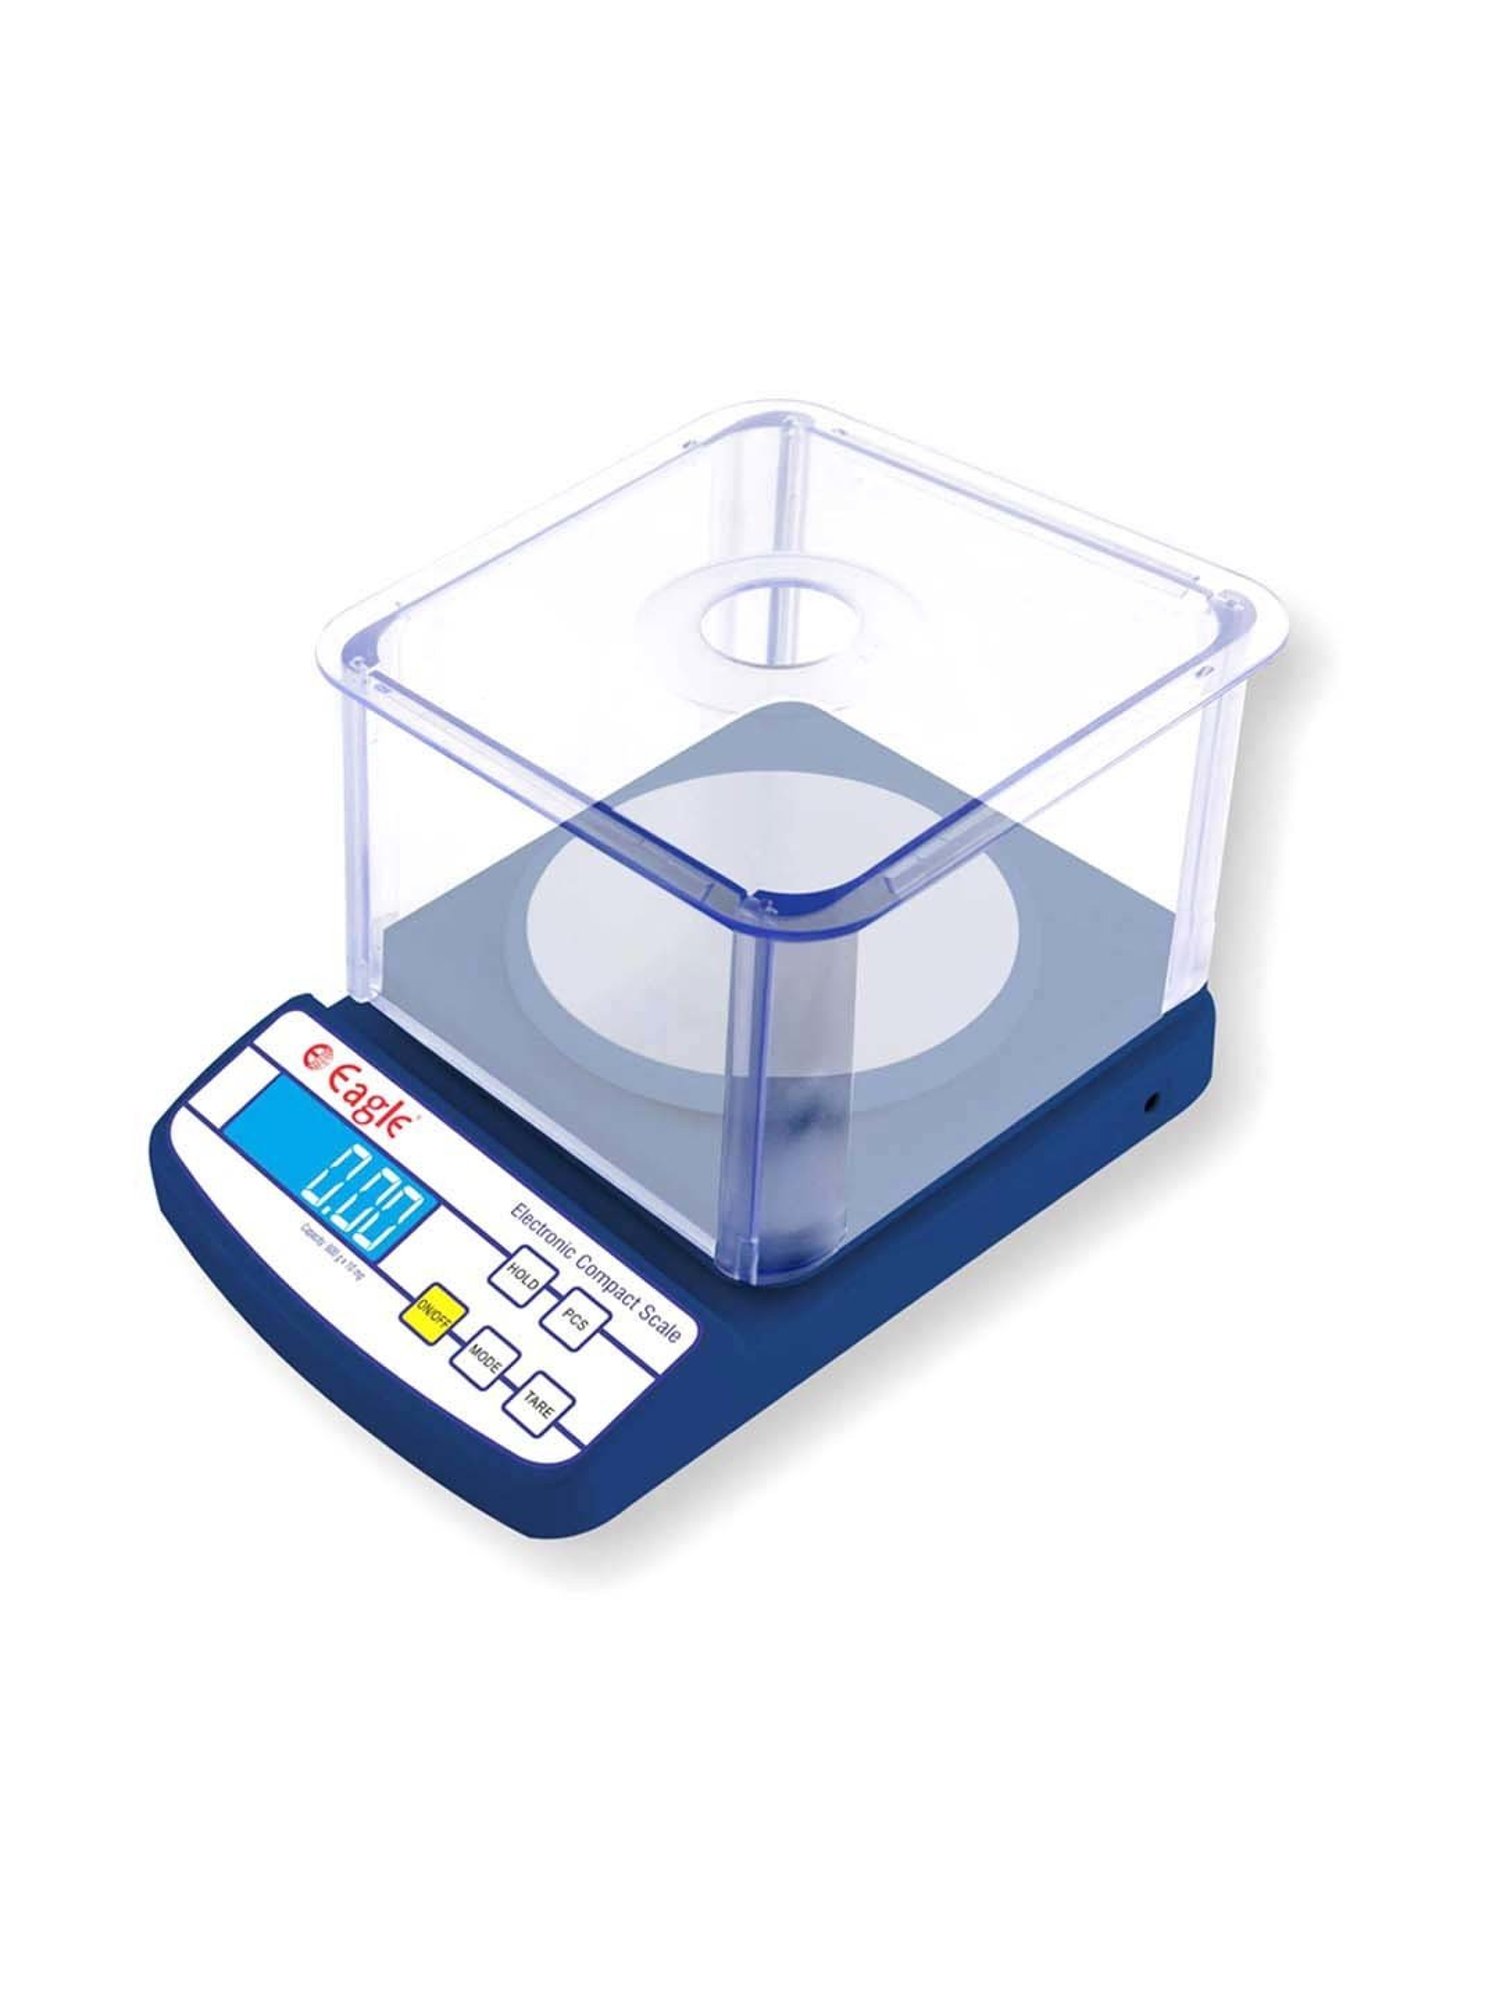 Buy Eagle Digital Weighing Scale with 180 Kg Capacity,Electronic